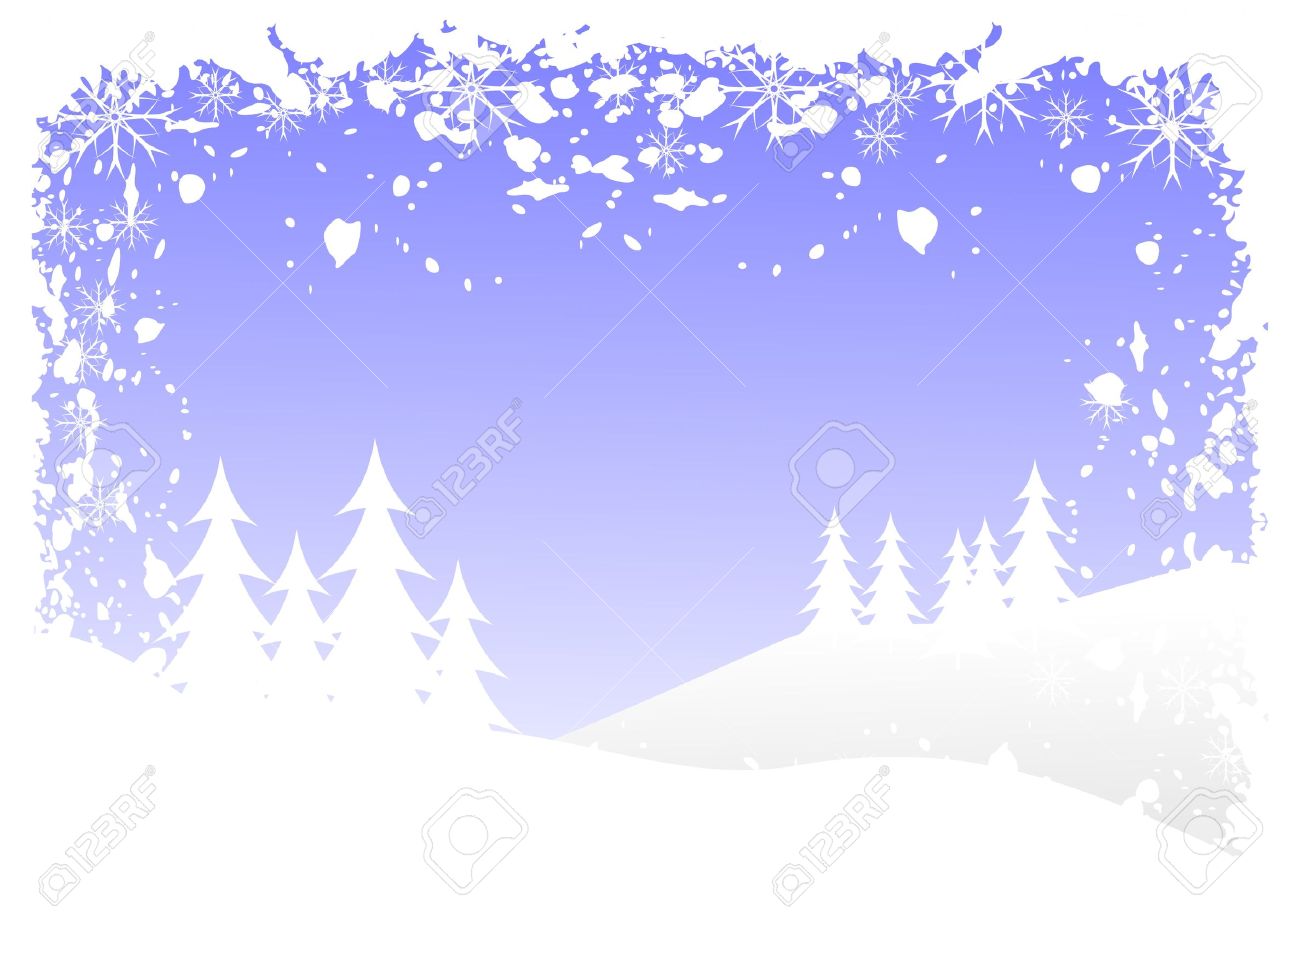 Abstract Grunge Winter Background Scene With Snowy Christmas